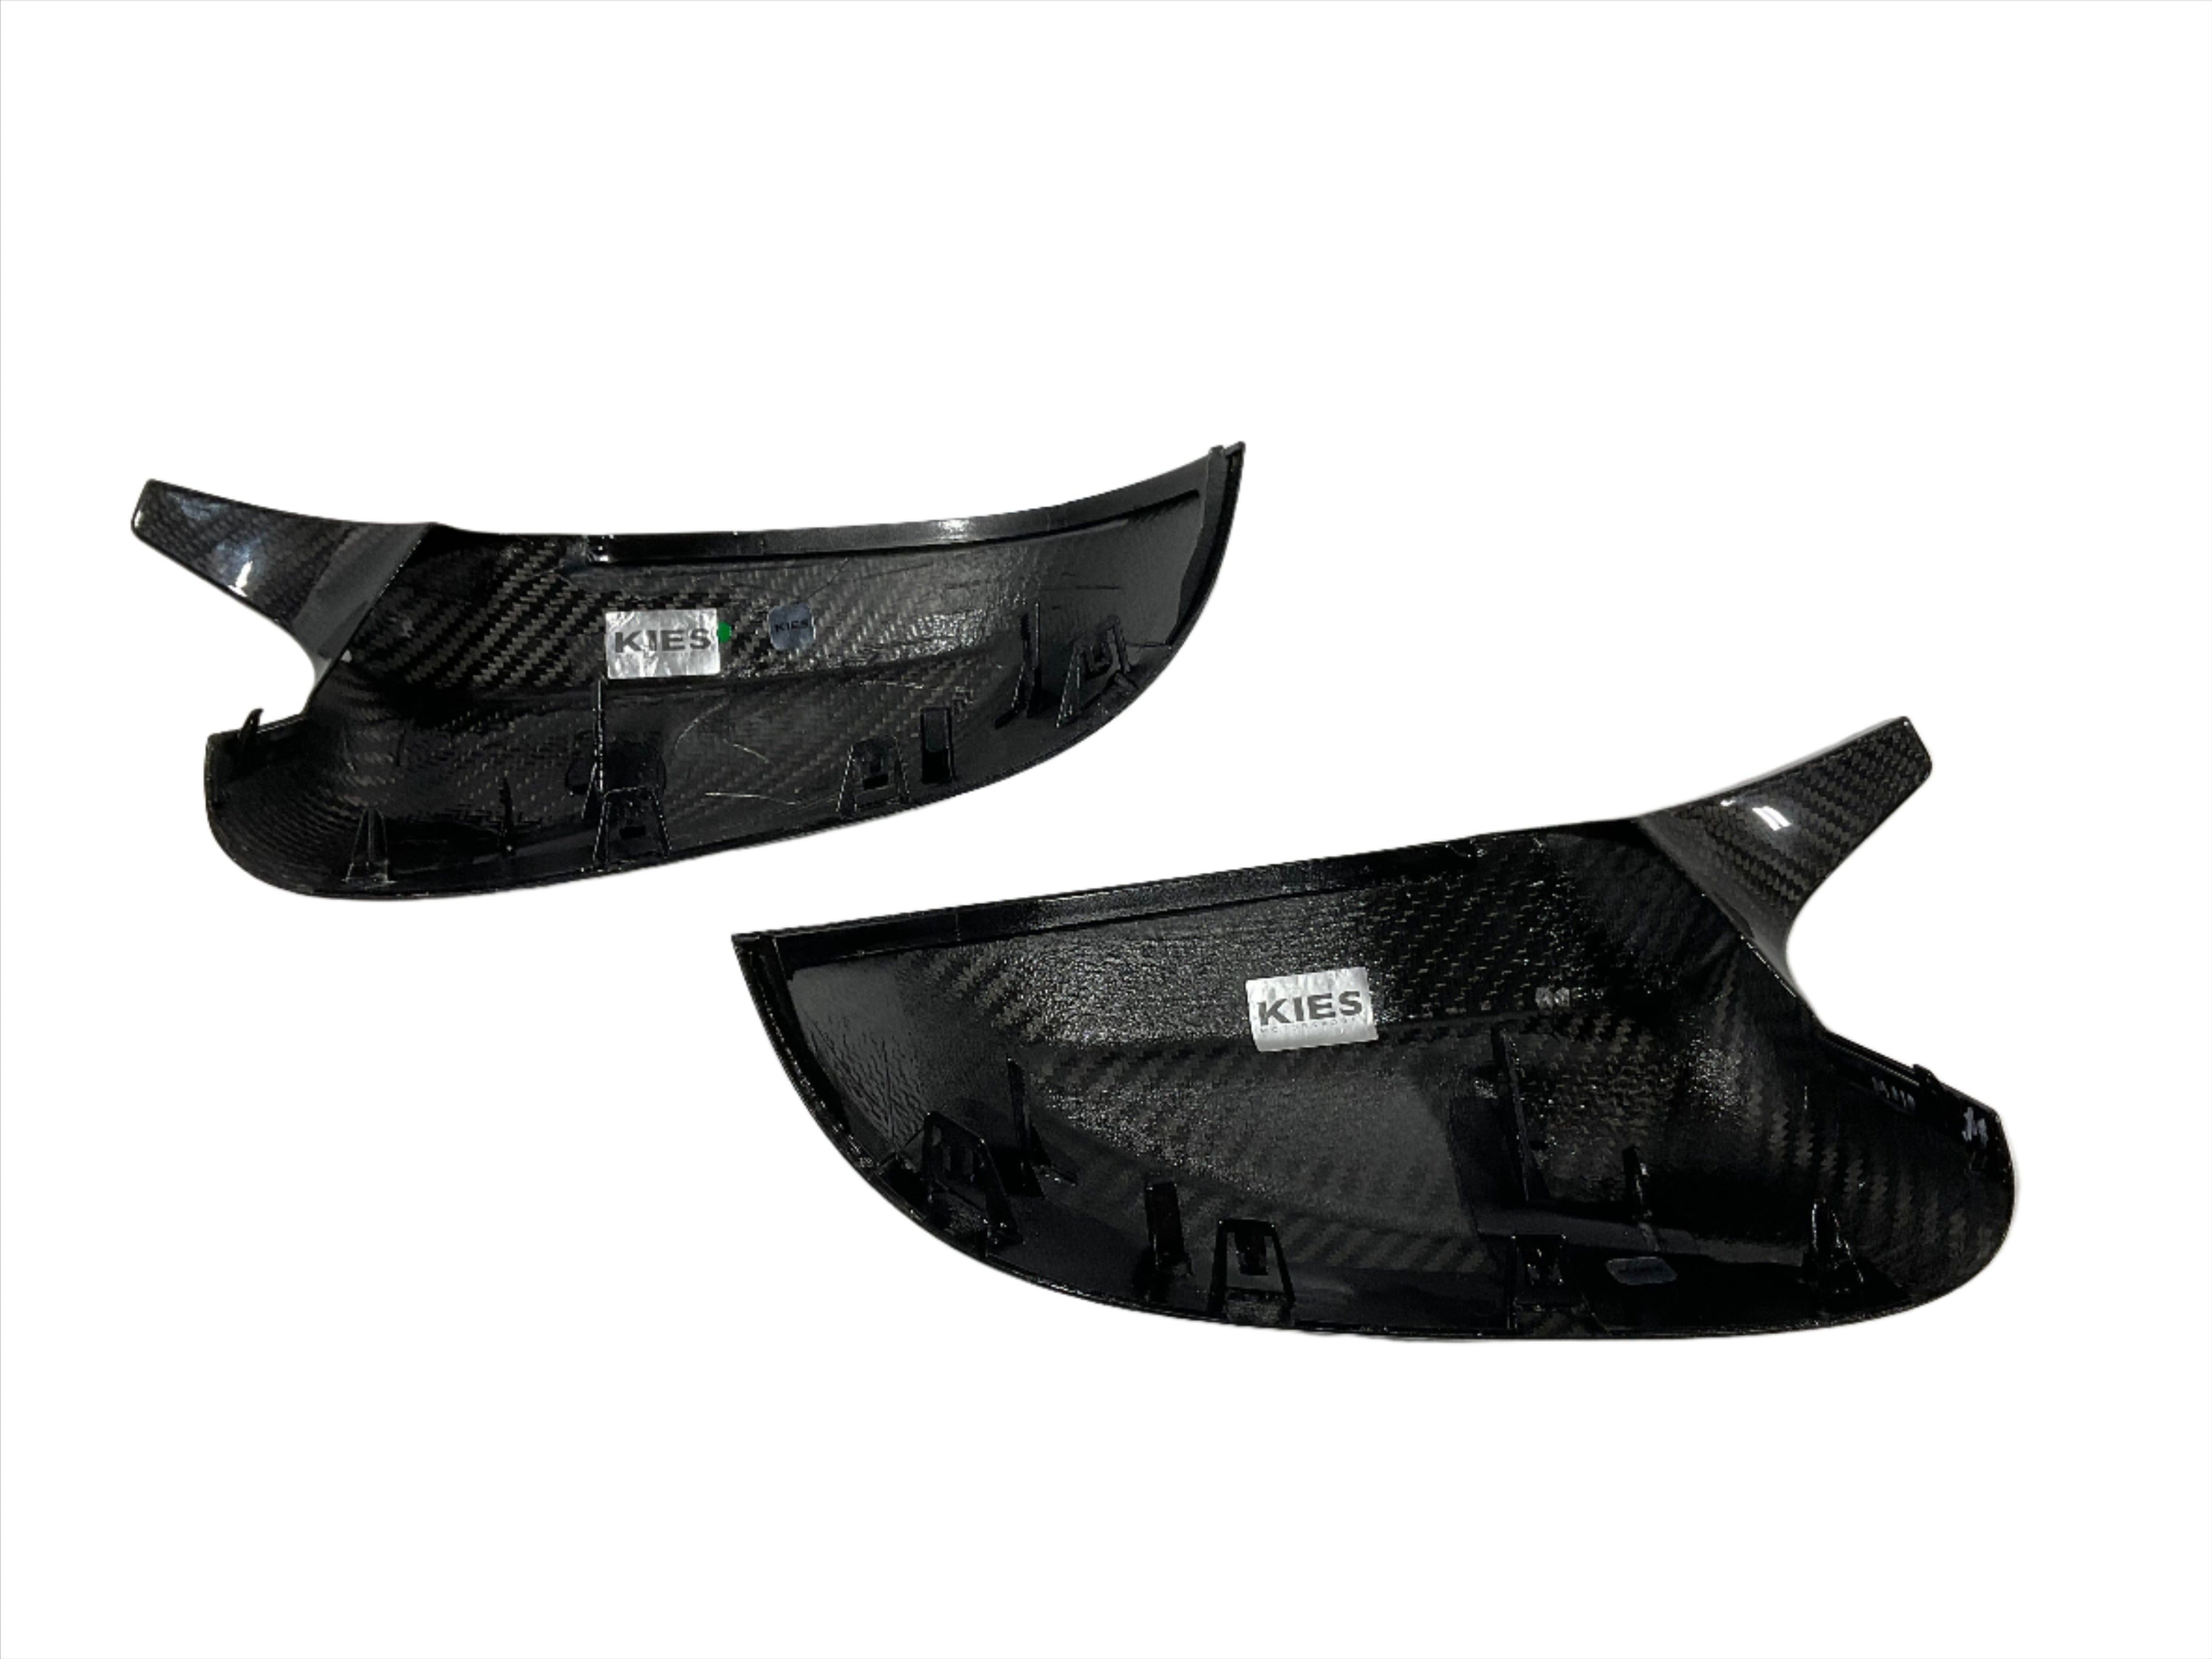 Kies-Motorsports Kies Motorsports BMW X3 (G01) / X4 (G02) / X5 (G05) / X6 (G06) / X7 (G07) M Inspired Dry Carbon Fiber Full Replacement Mirror Covers